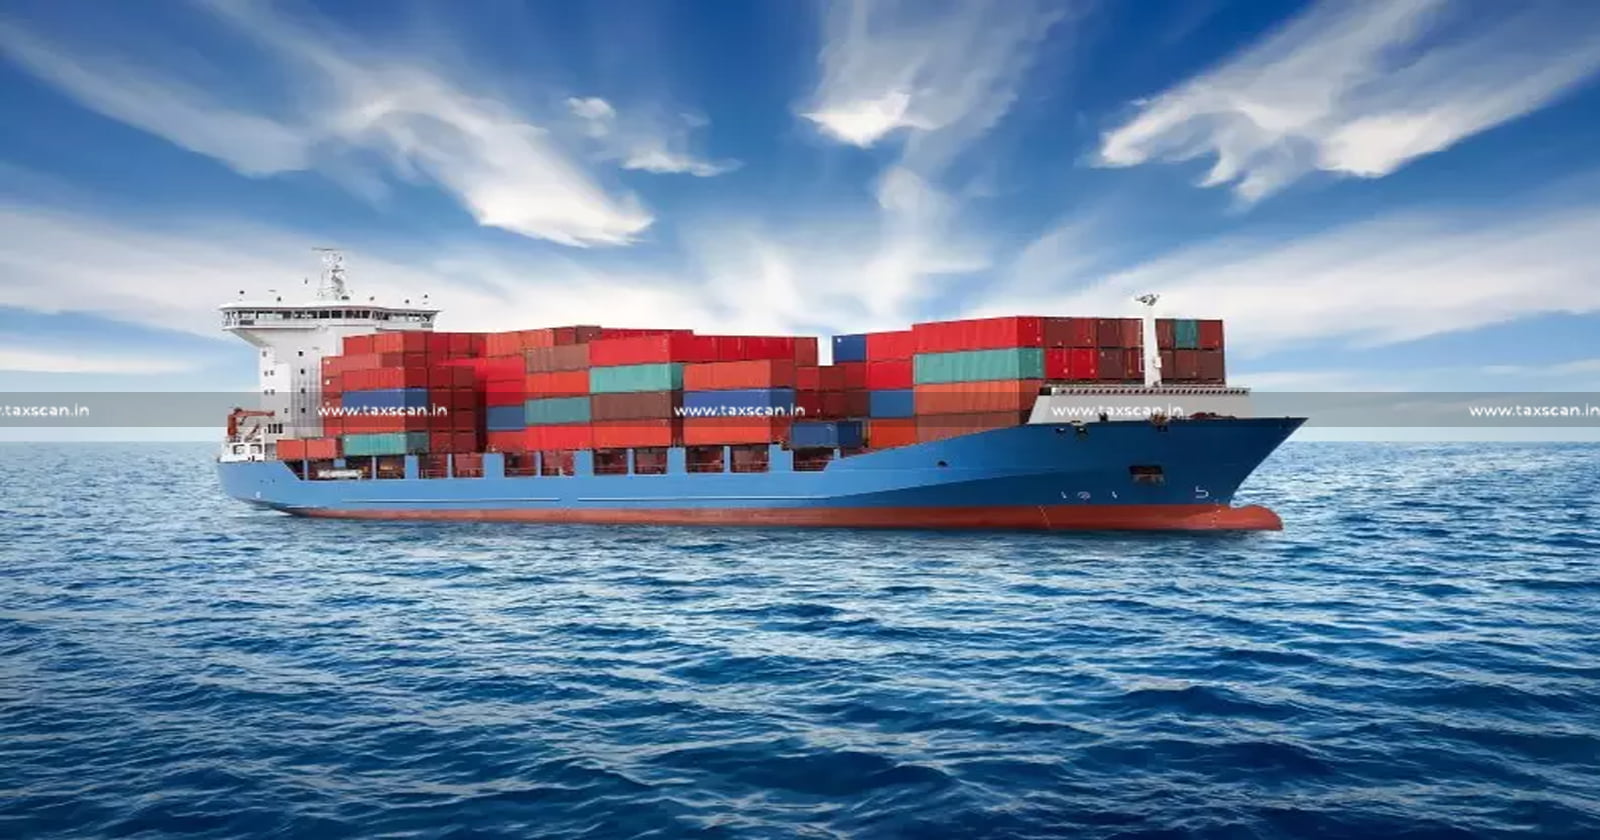 ITAT Deletes Disallowance - Ocean Freight Charges - Korean AE as Amount can be Taxable onlITAT Deletes Disallowance on Ocean Freight Charges Paid to Korean AE - Taxable only in Contracting States - Contracting States - taxscan